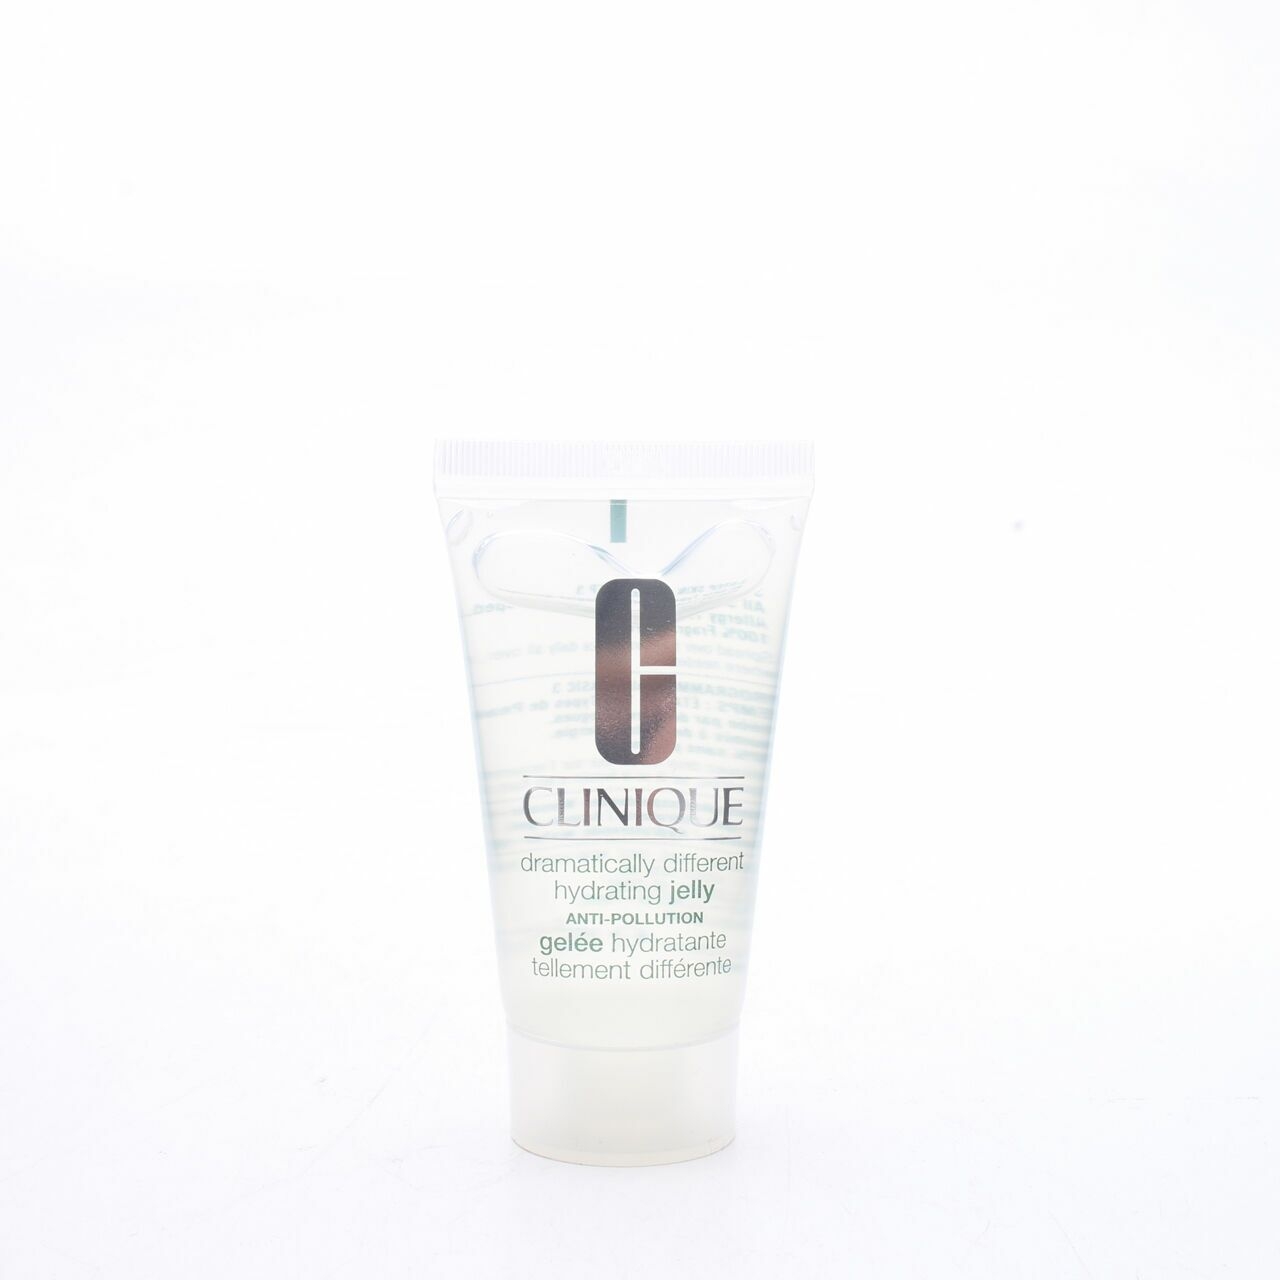 Clinique Dramatically Different Hydrating Jelly Anti-Pollution Skin Care